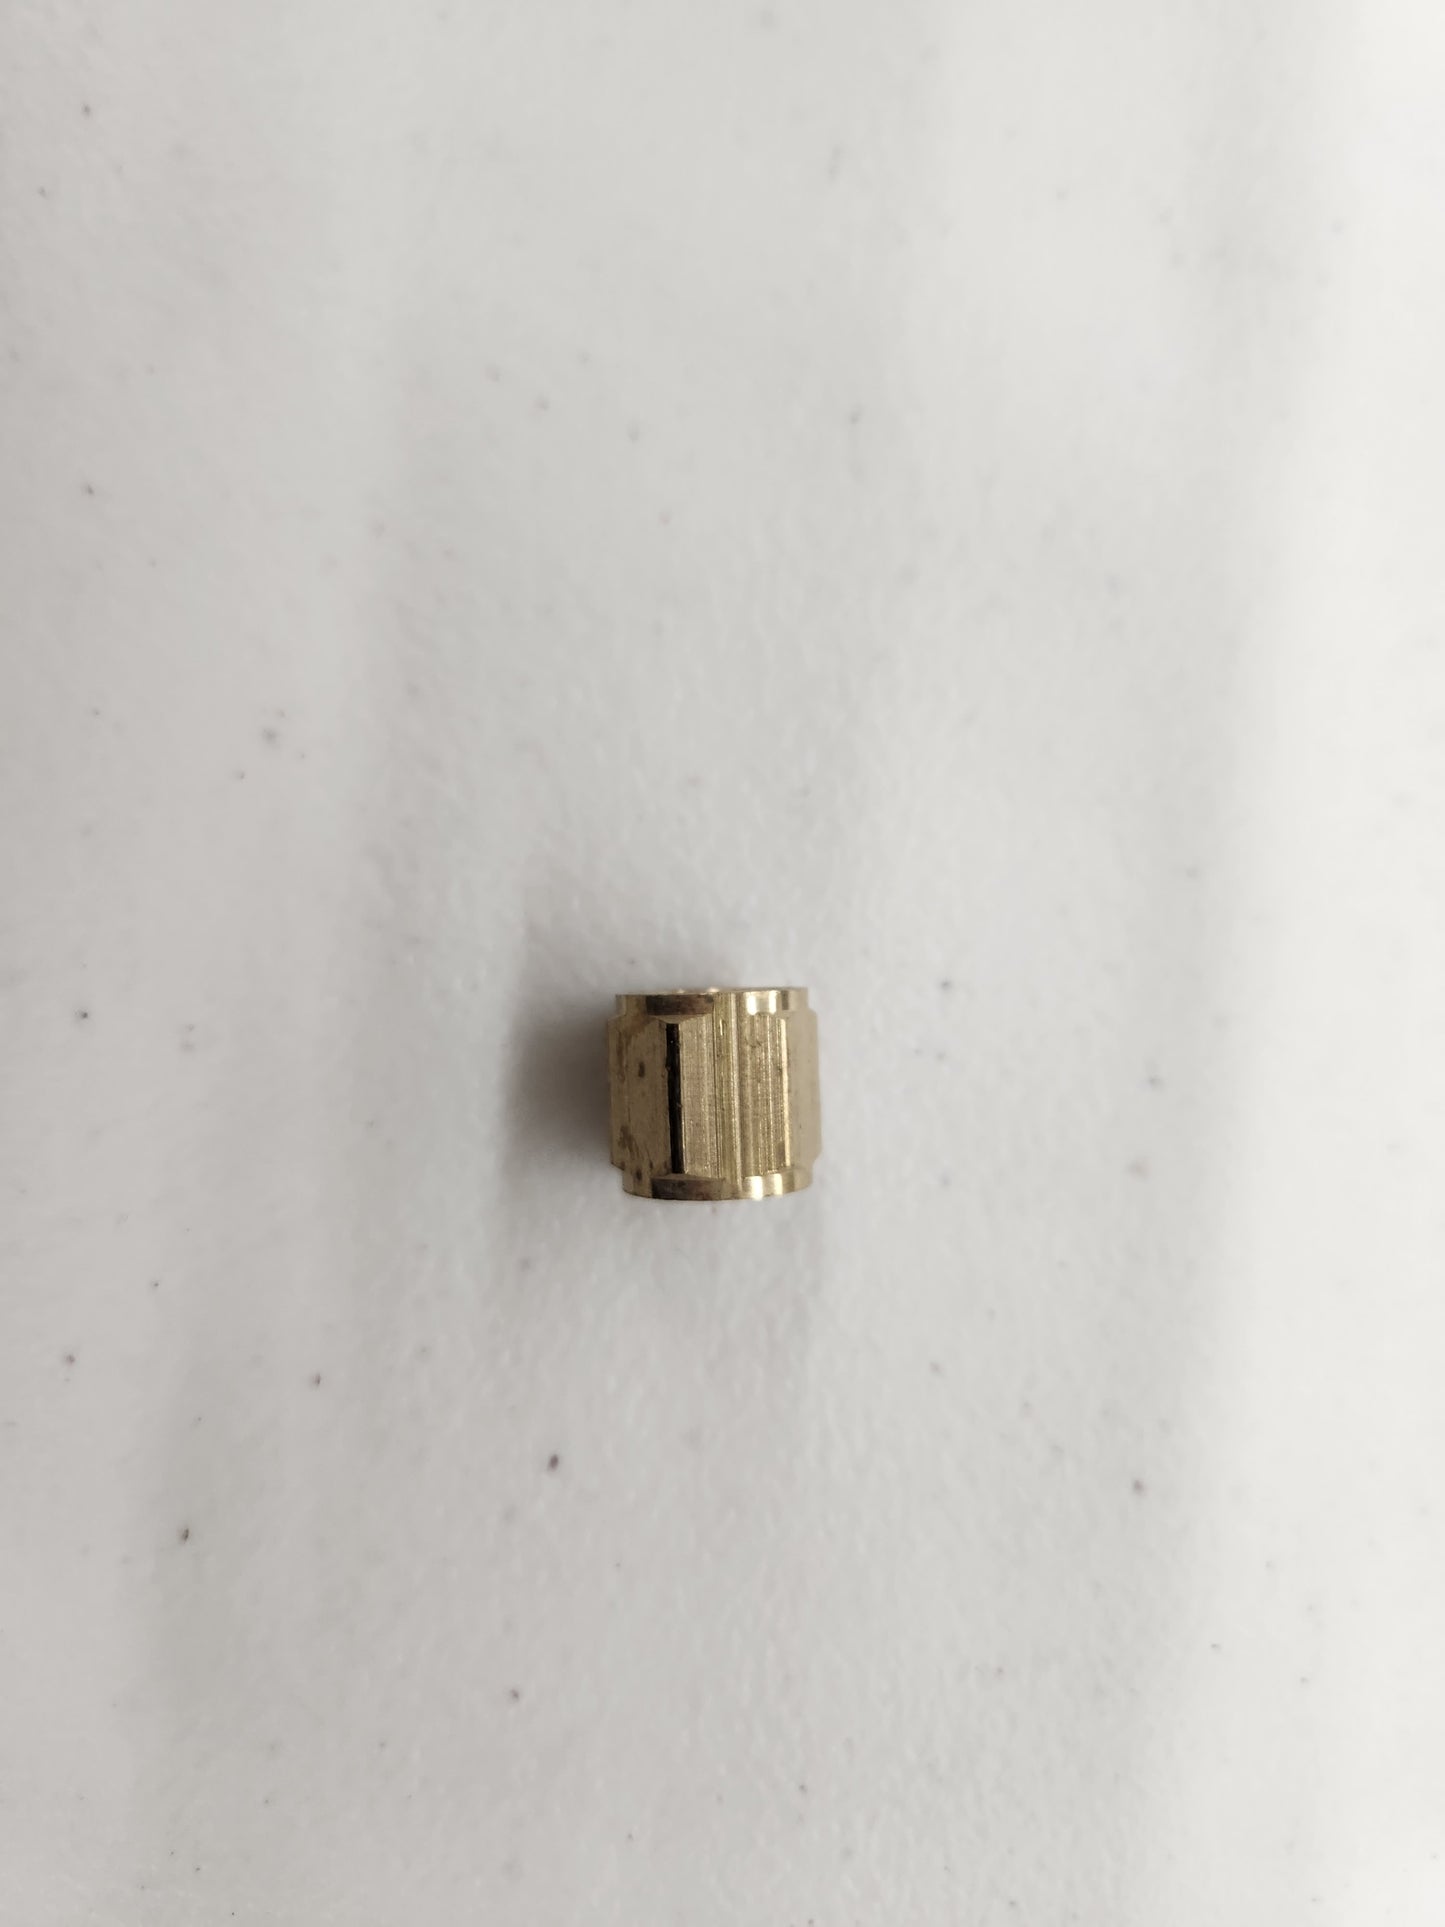 Double female brass adapter M14x1.5 threads